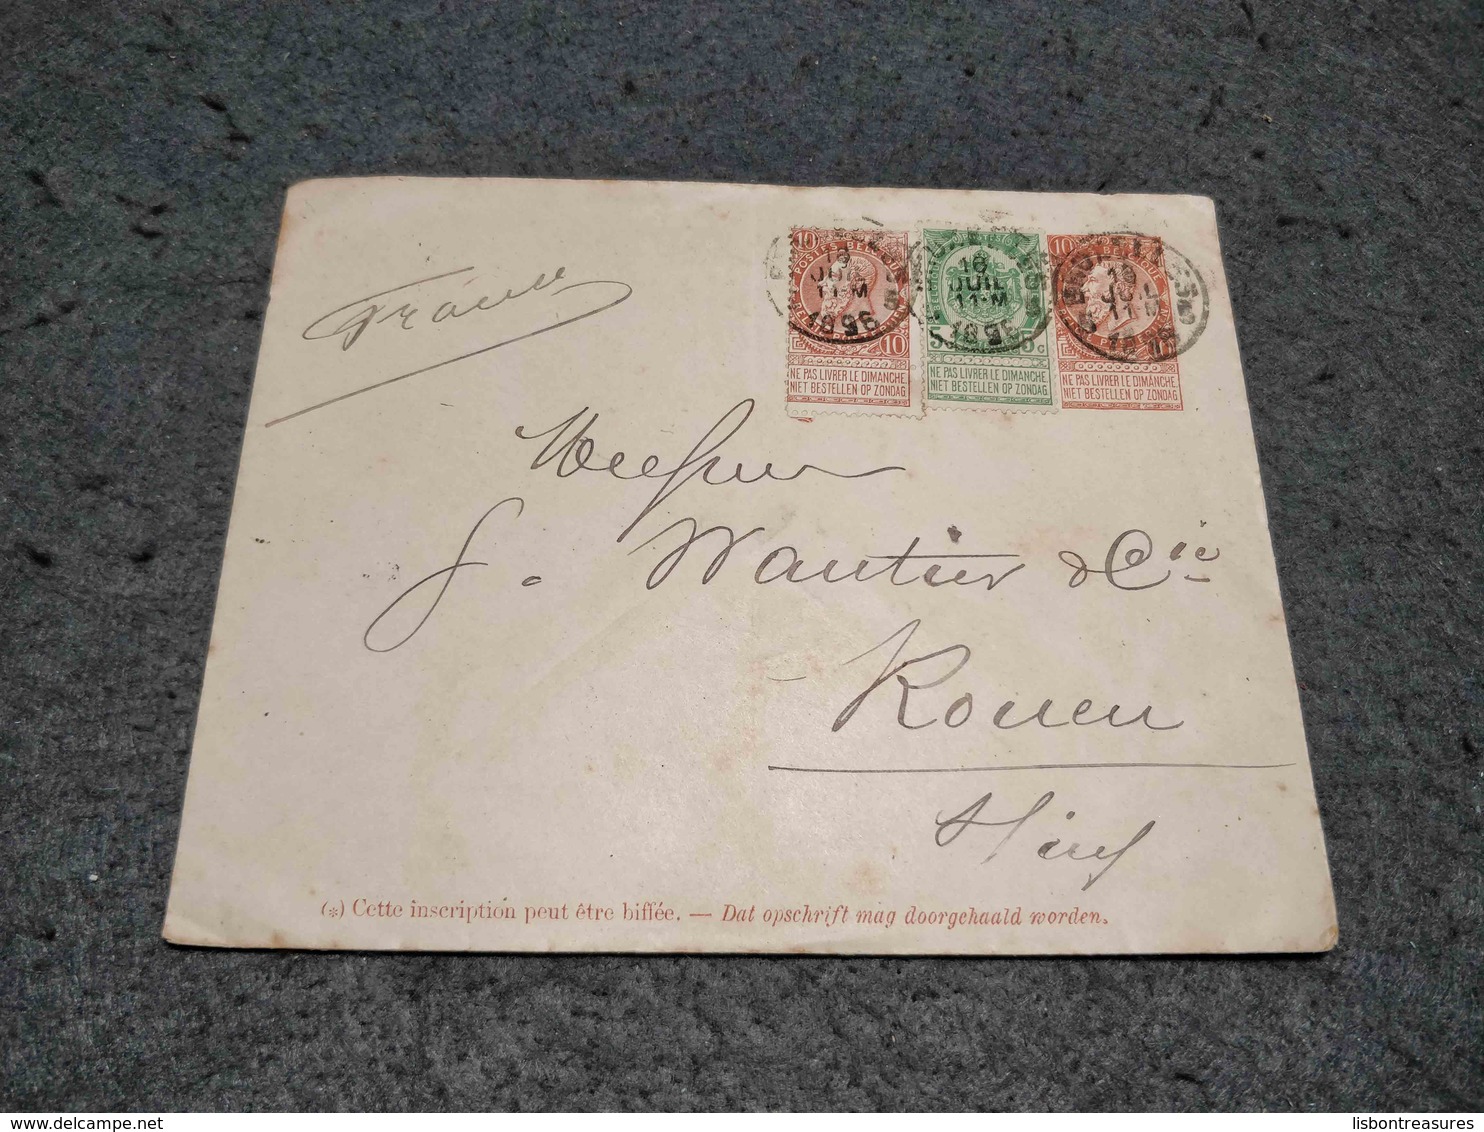 BELGIUM BELGIQUE STATIONERY COVER UPRATED X2 BRUXELLES TO ROUEN FRANCE 1896 - Buste-lettere